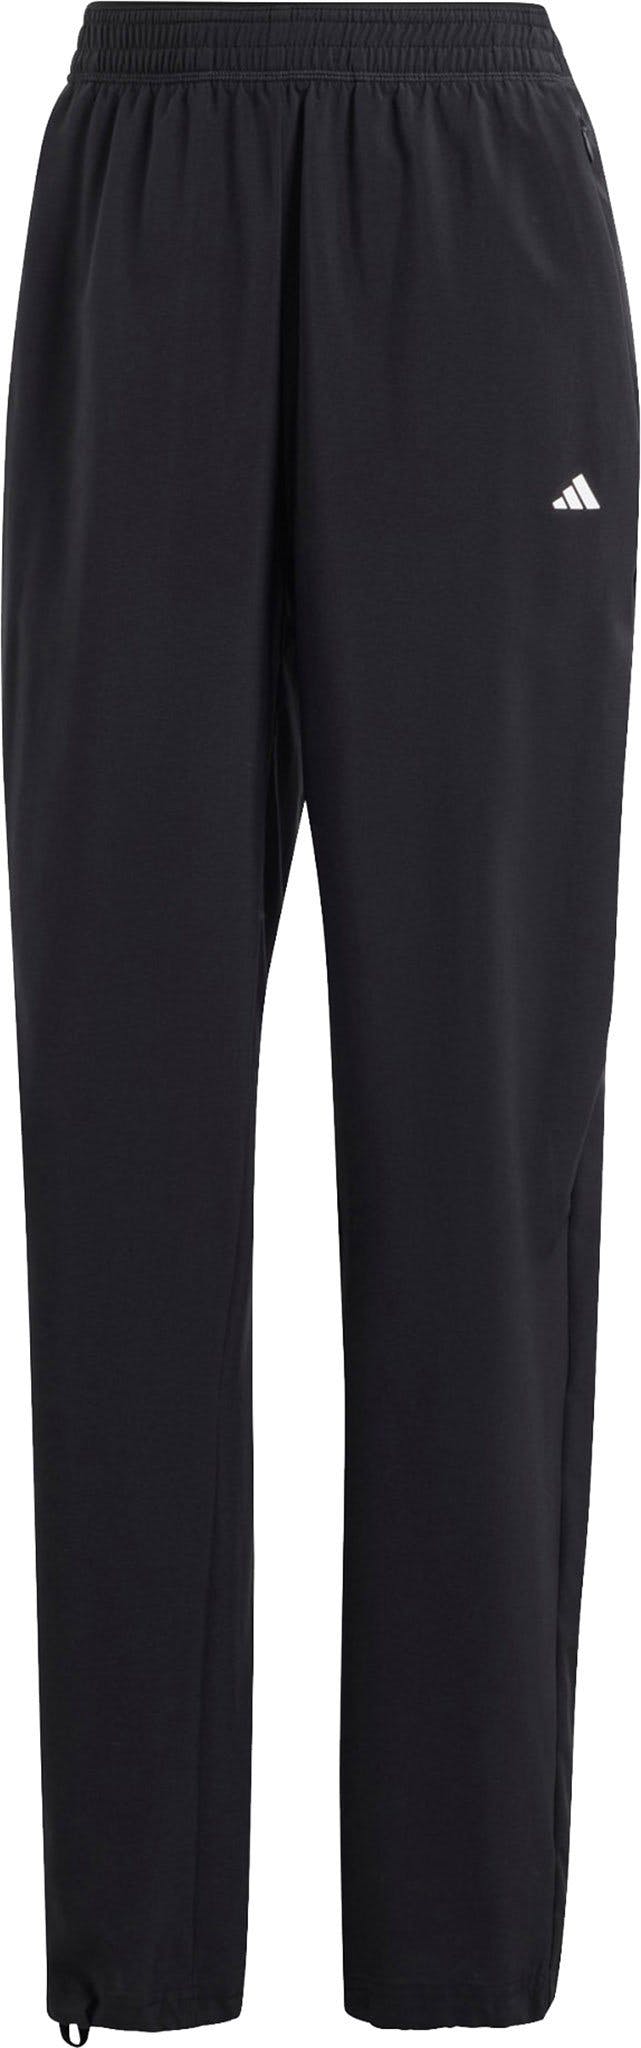 Product image for True Move Training Pant - Women's